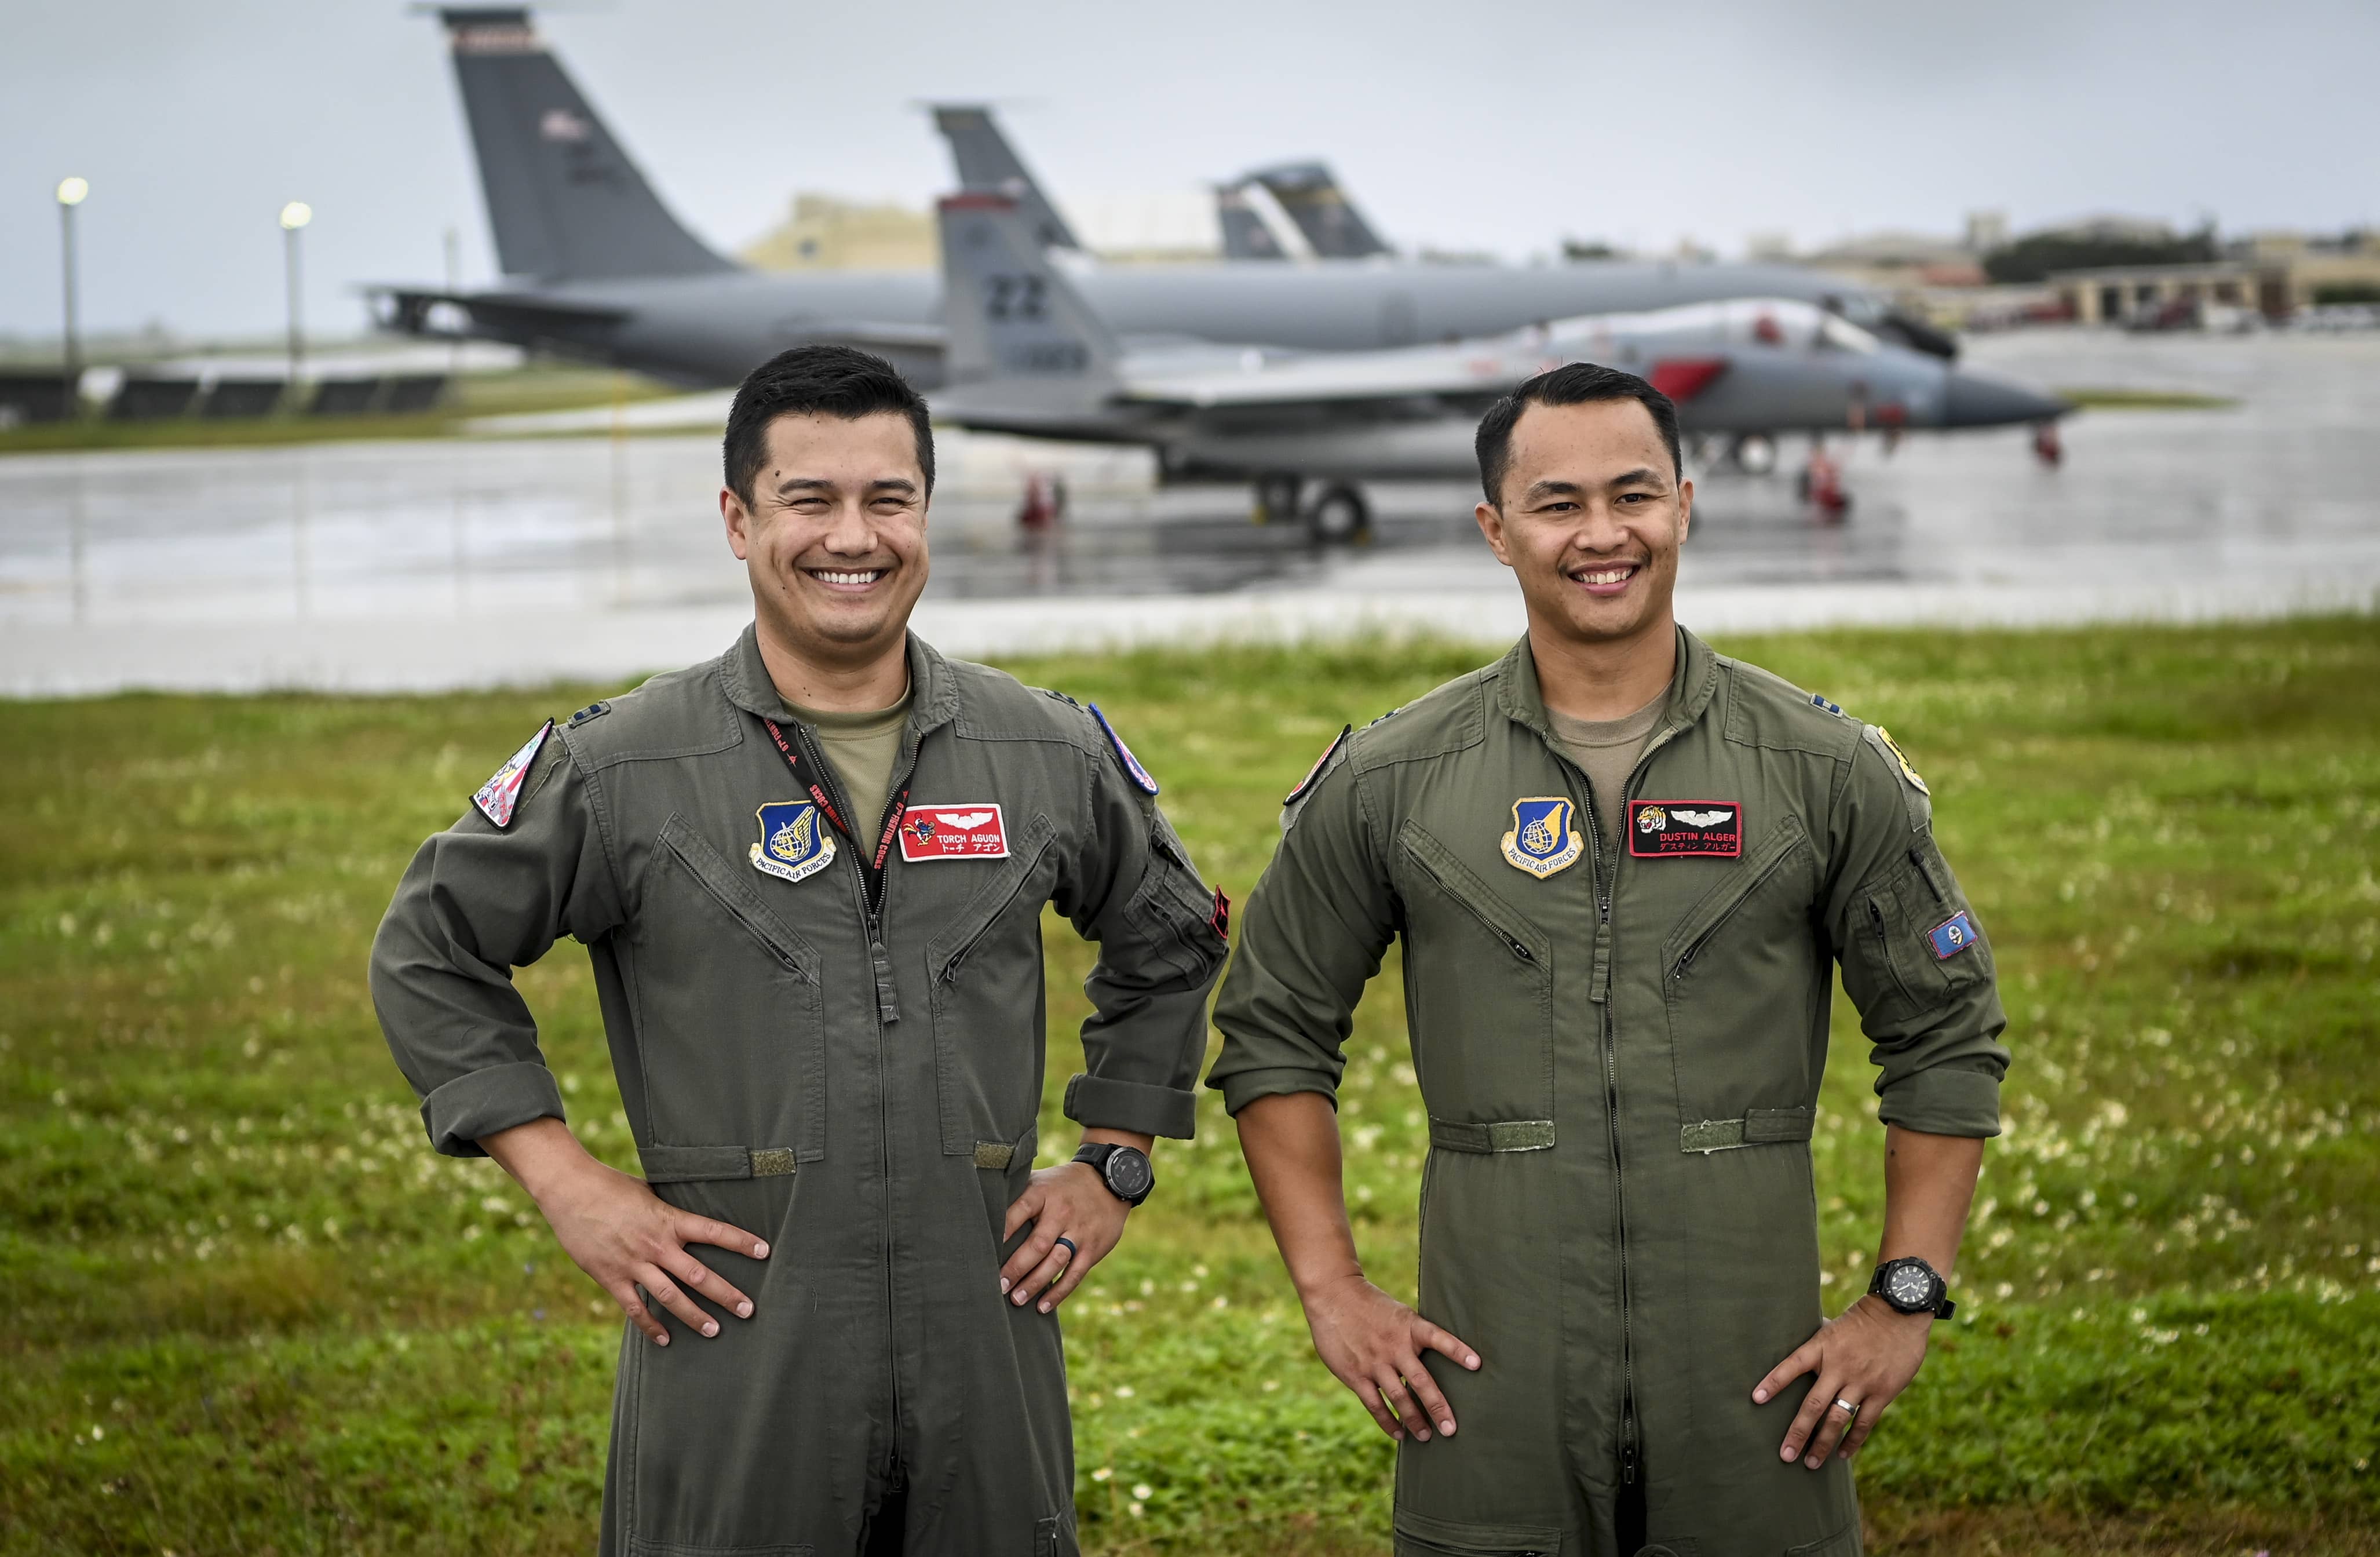 Two Air Force pilots reflect on their lessons from UOG where they both graduated with honors in 2011. They recently came home to participate in Cope North.